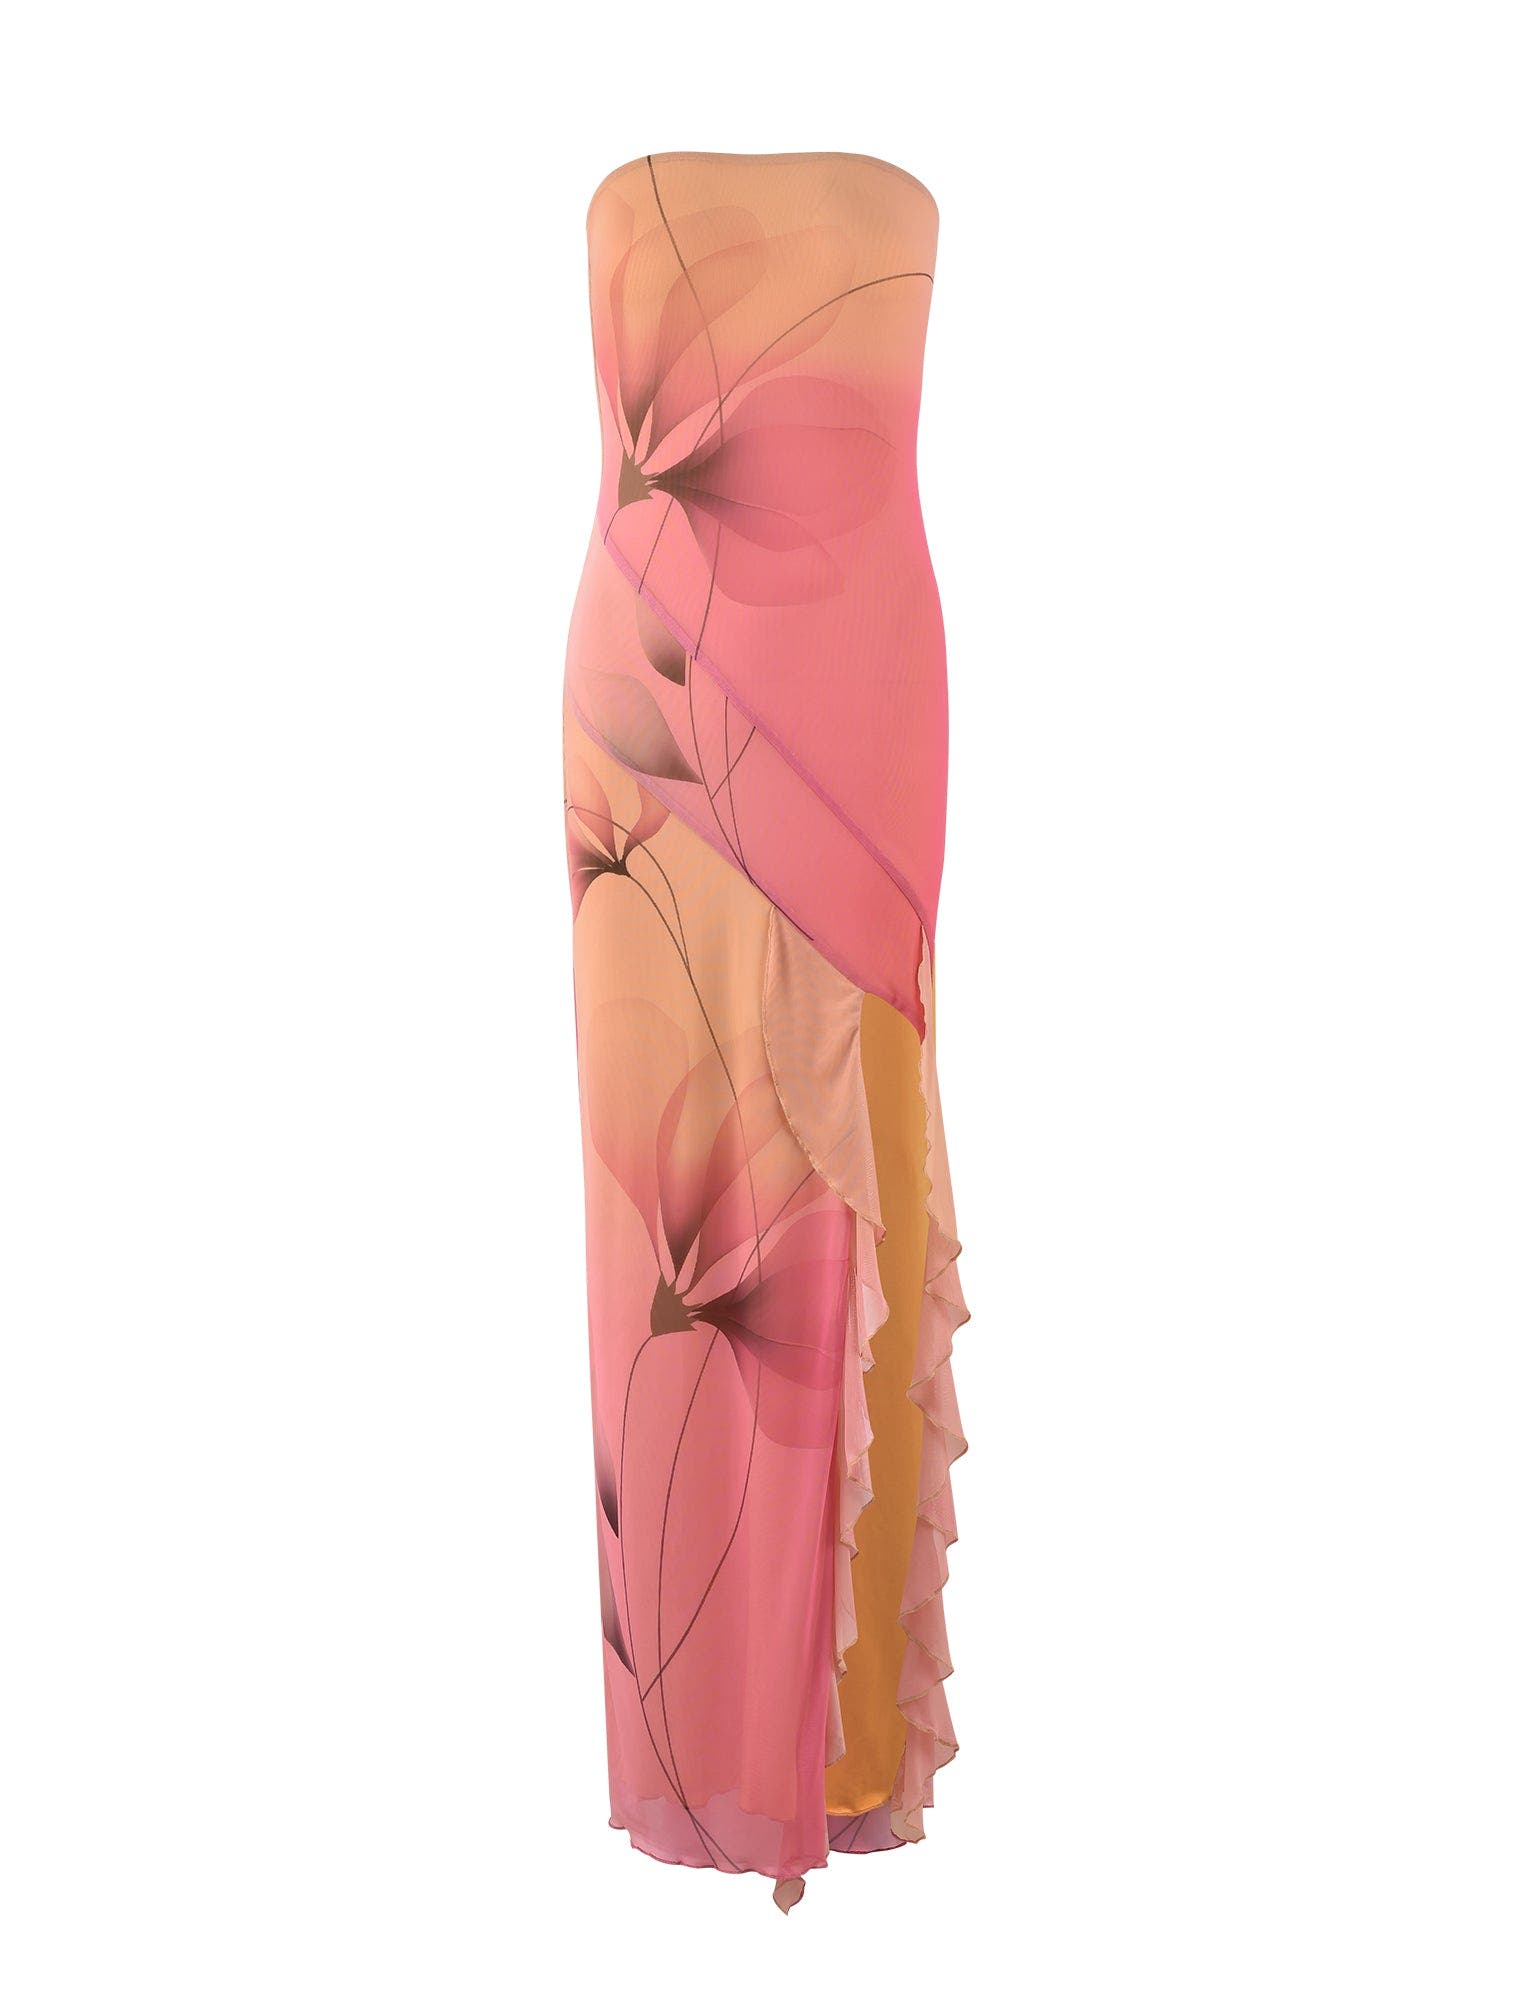 THEO MAXI DRESS - MULTI : MACRO FLORAL : GRADIENT FLORAL